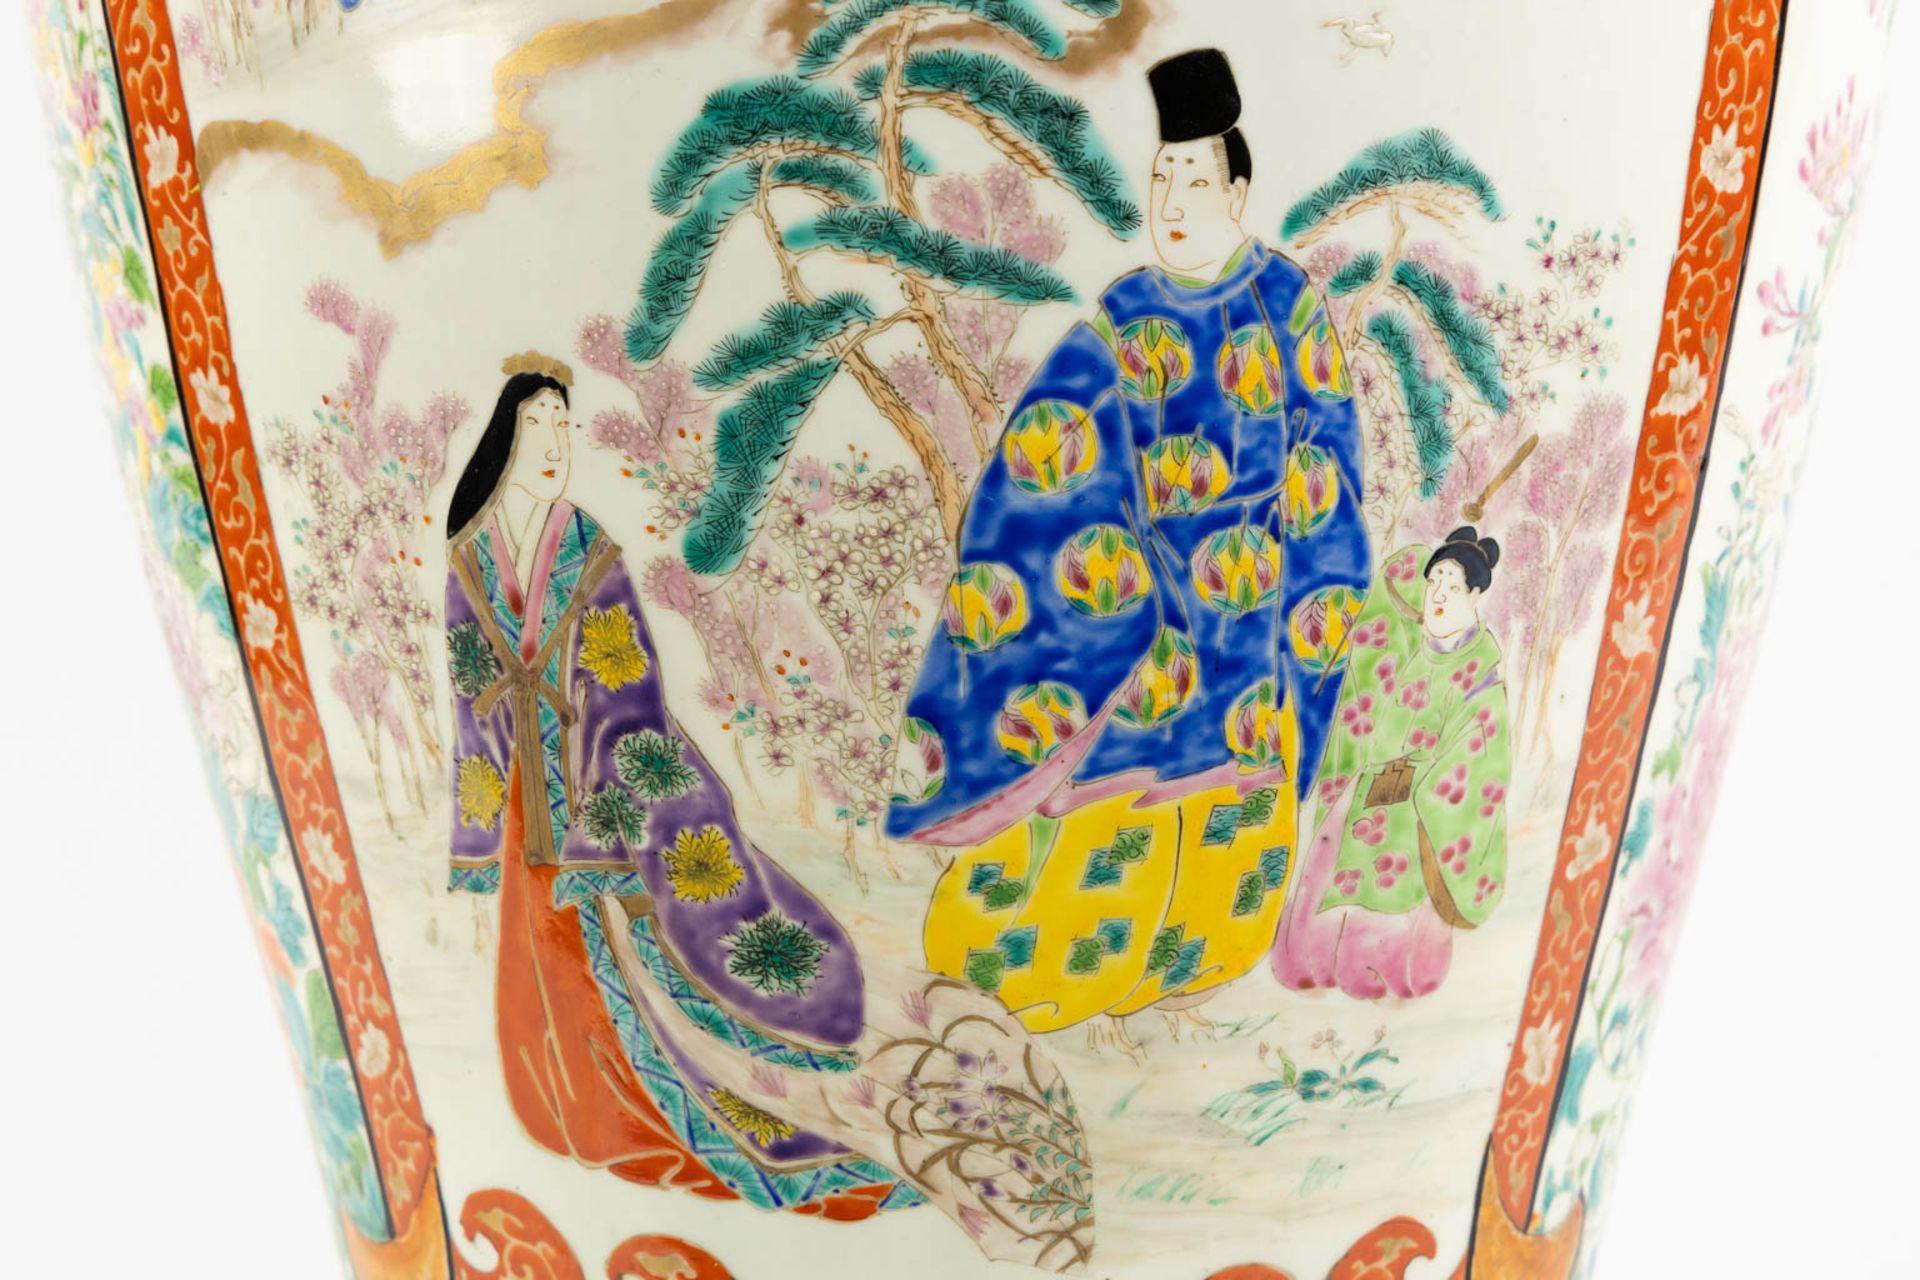 A large Japanese Kutani vase, decorated with fauna and flora. 19th C. (H:61 x D:38 cm) - Image 10 of 13